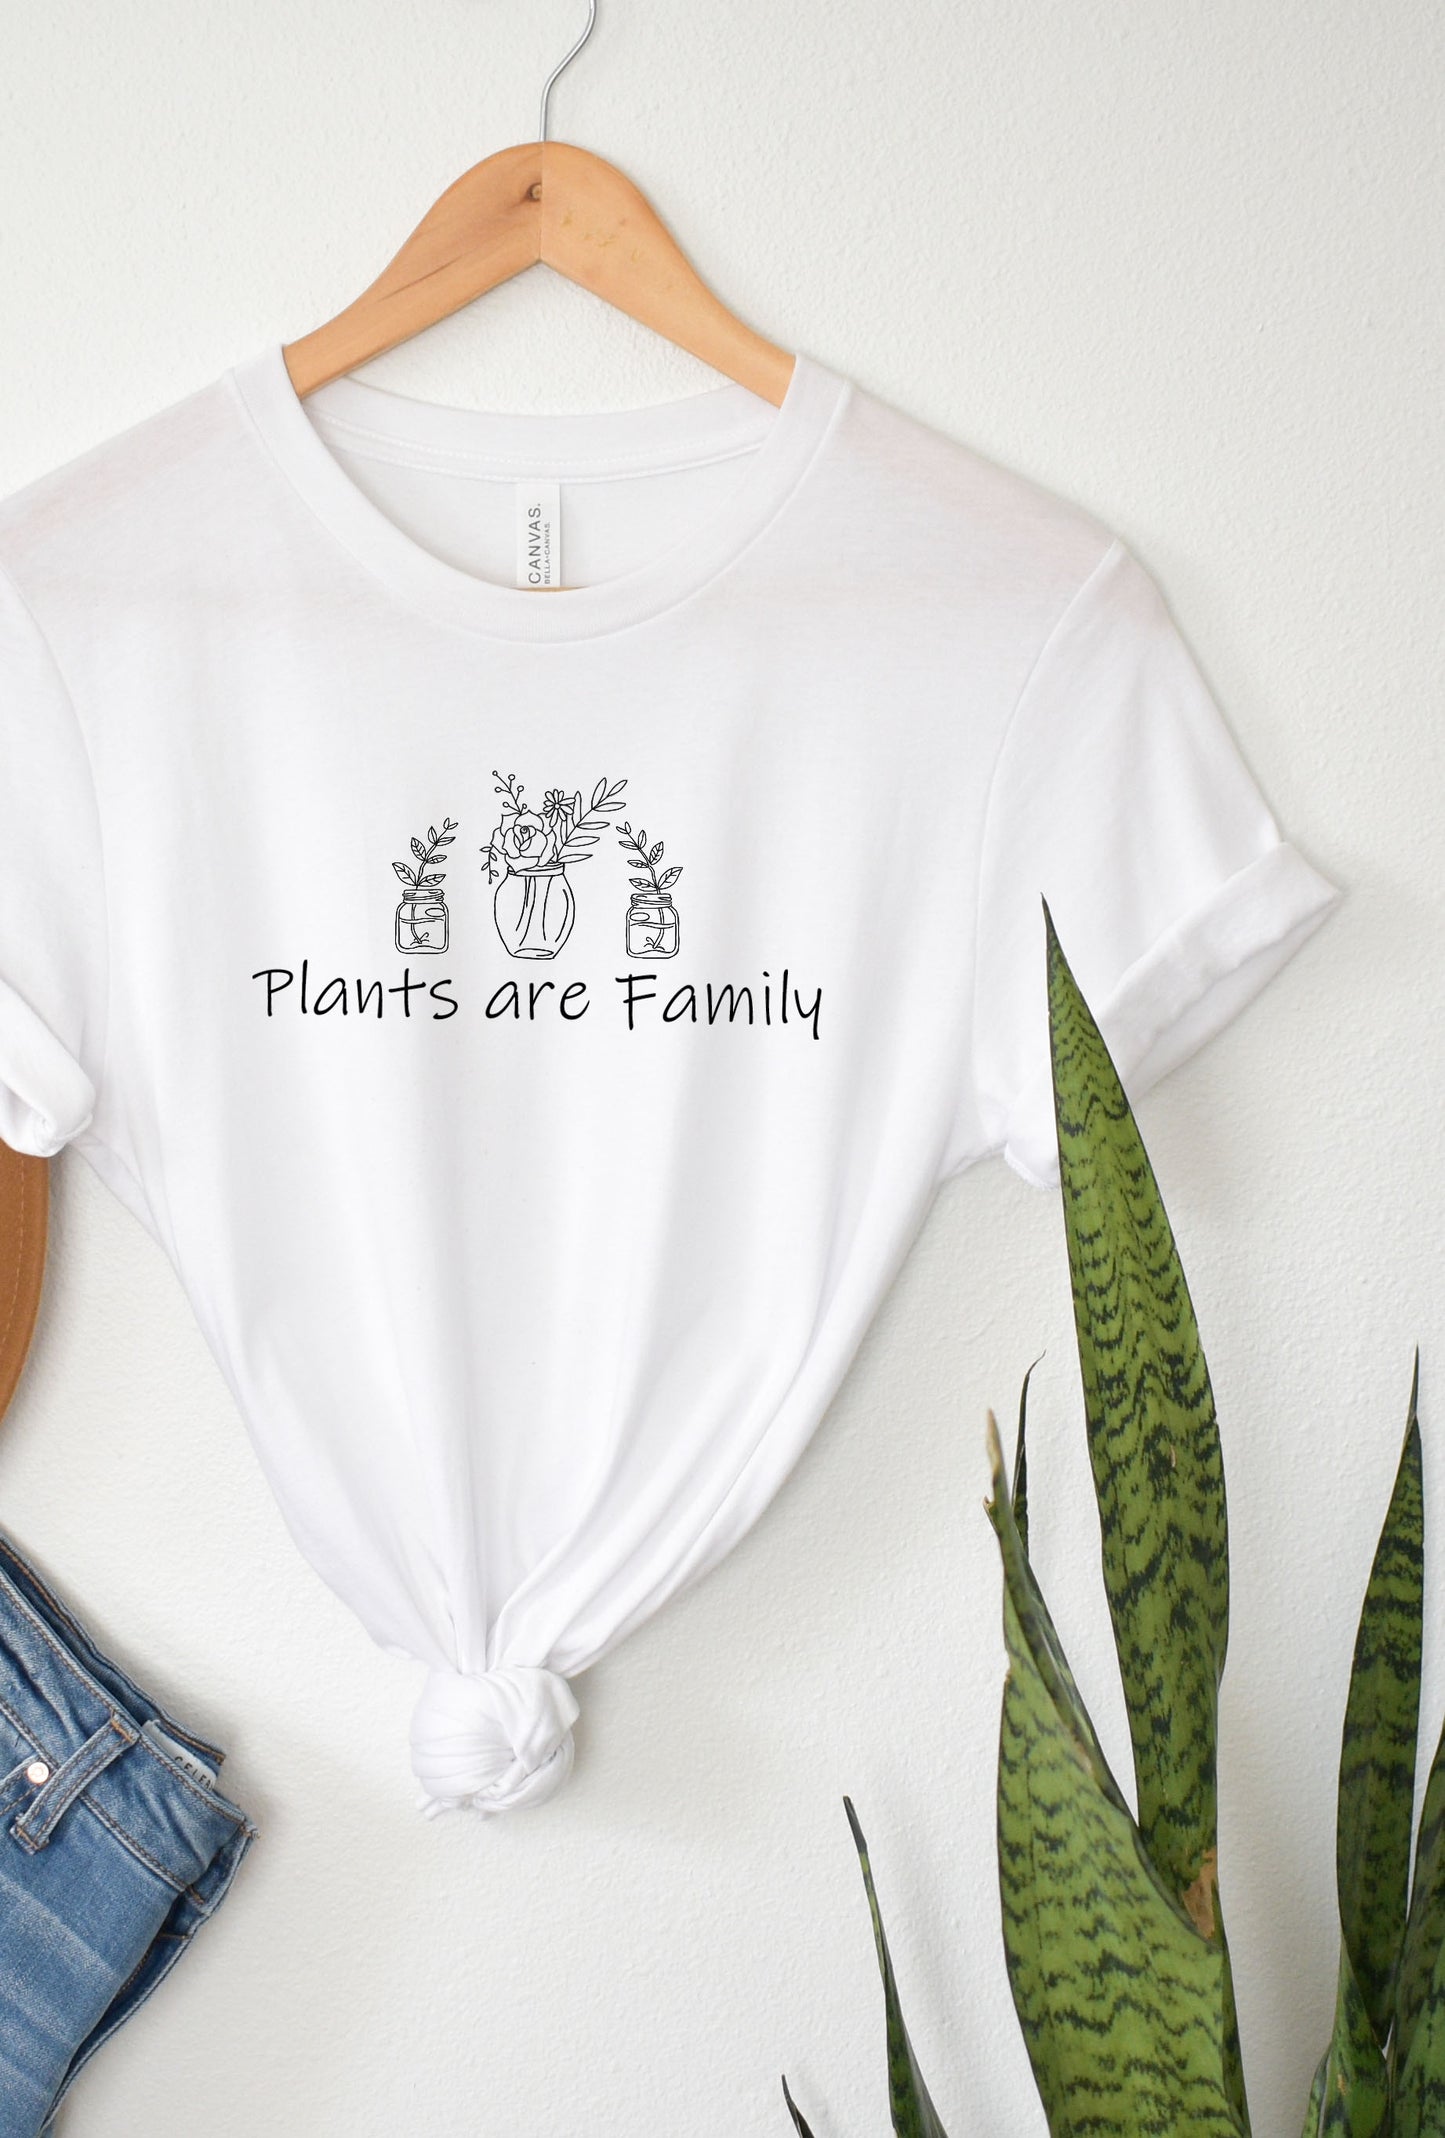 Plants are Family 1